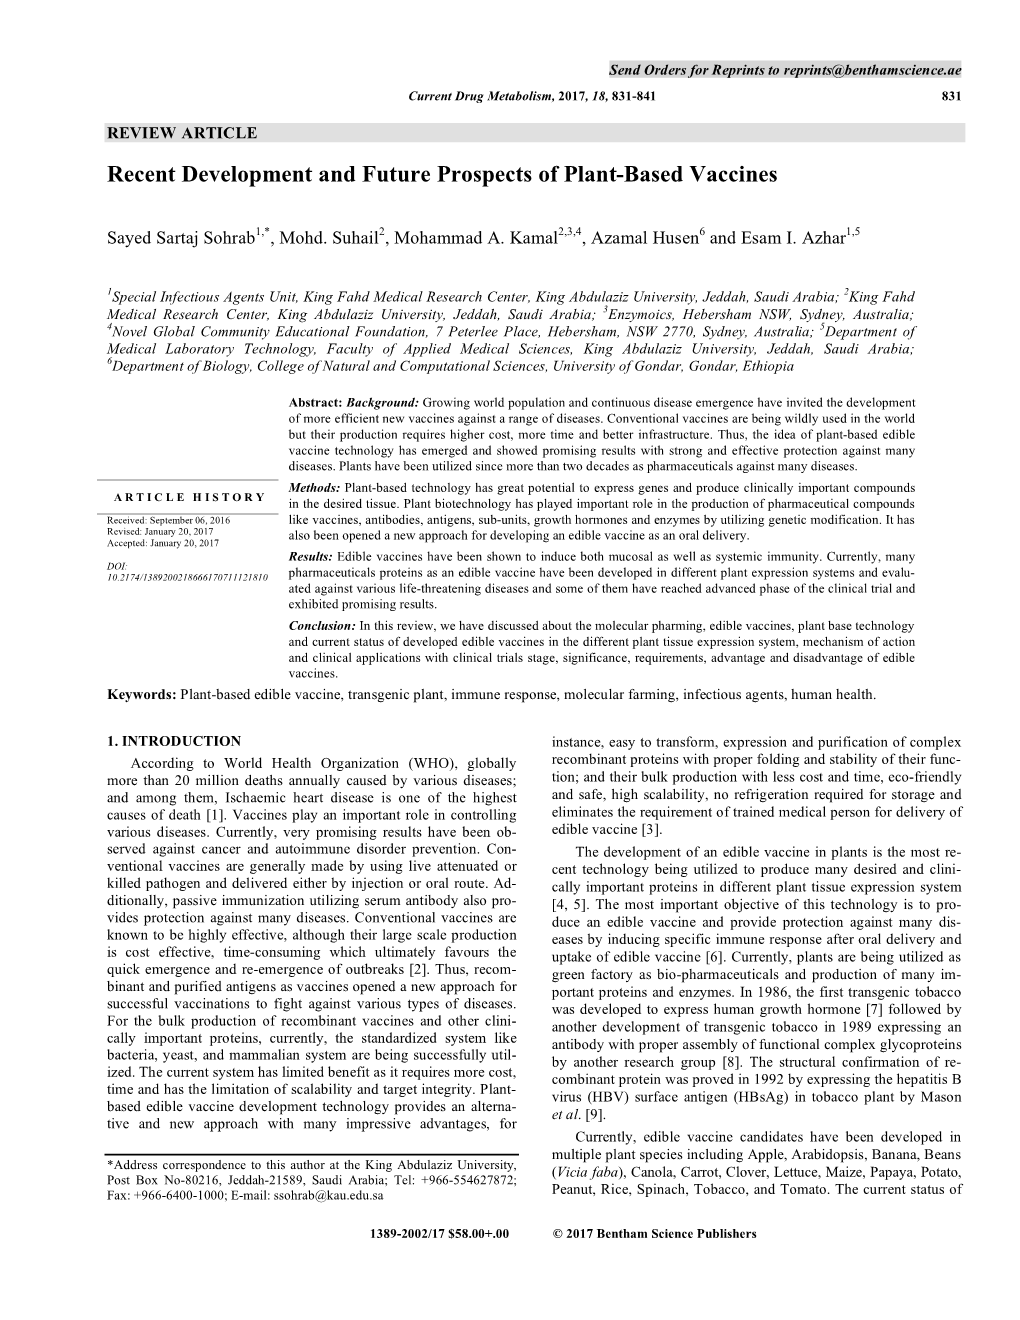 Recent Development and Future Prospects of Plant-Based Vaccines